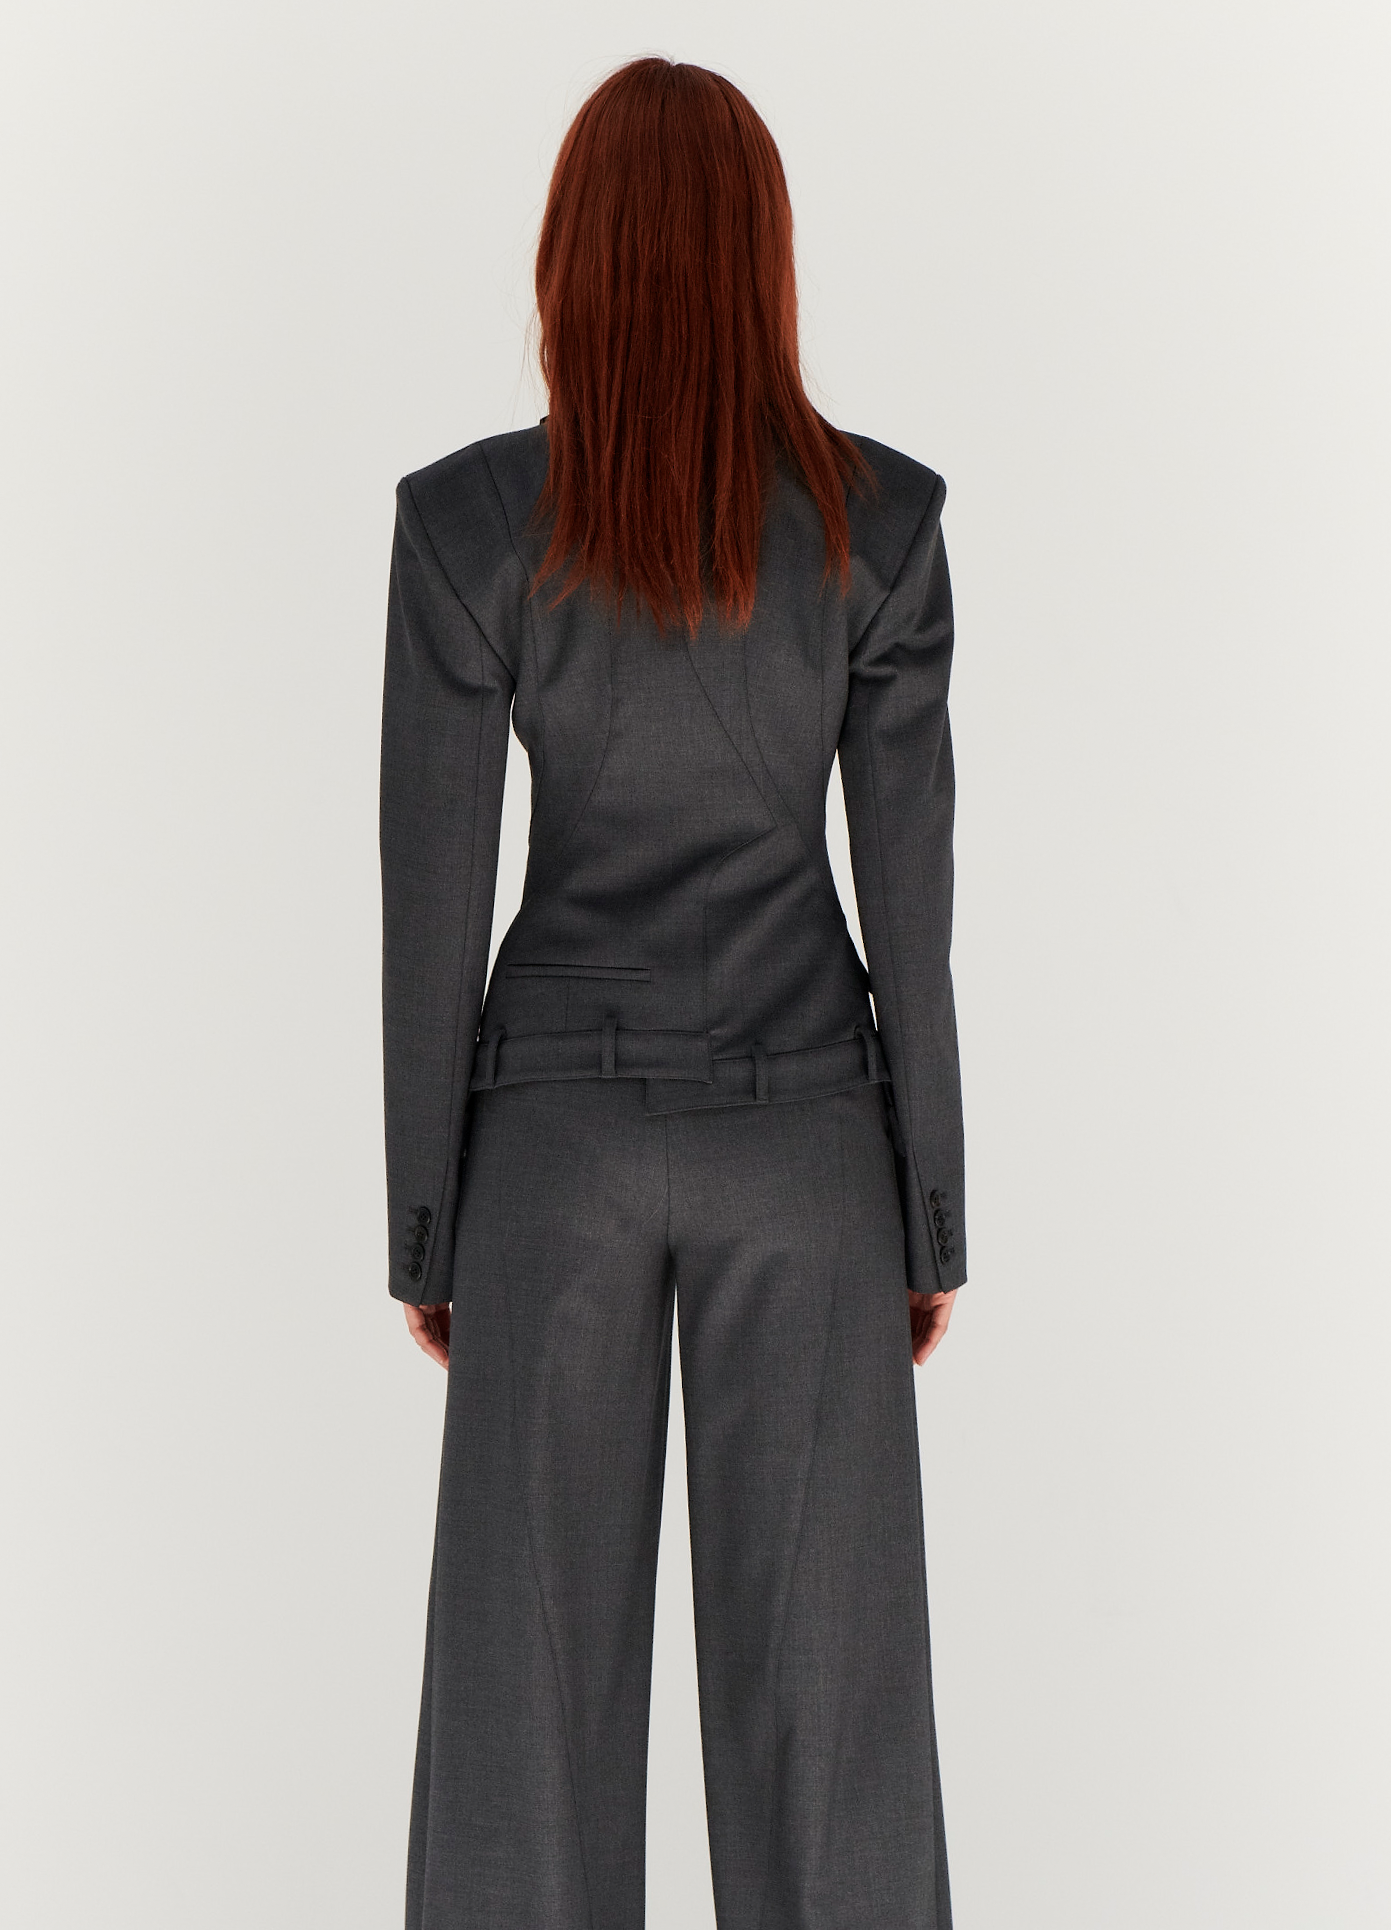 MONSE Fitted Deconstructed Jacket in Charcoal on model back view